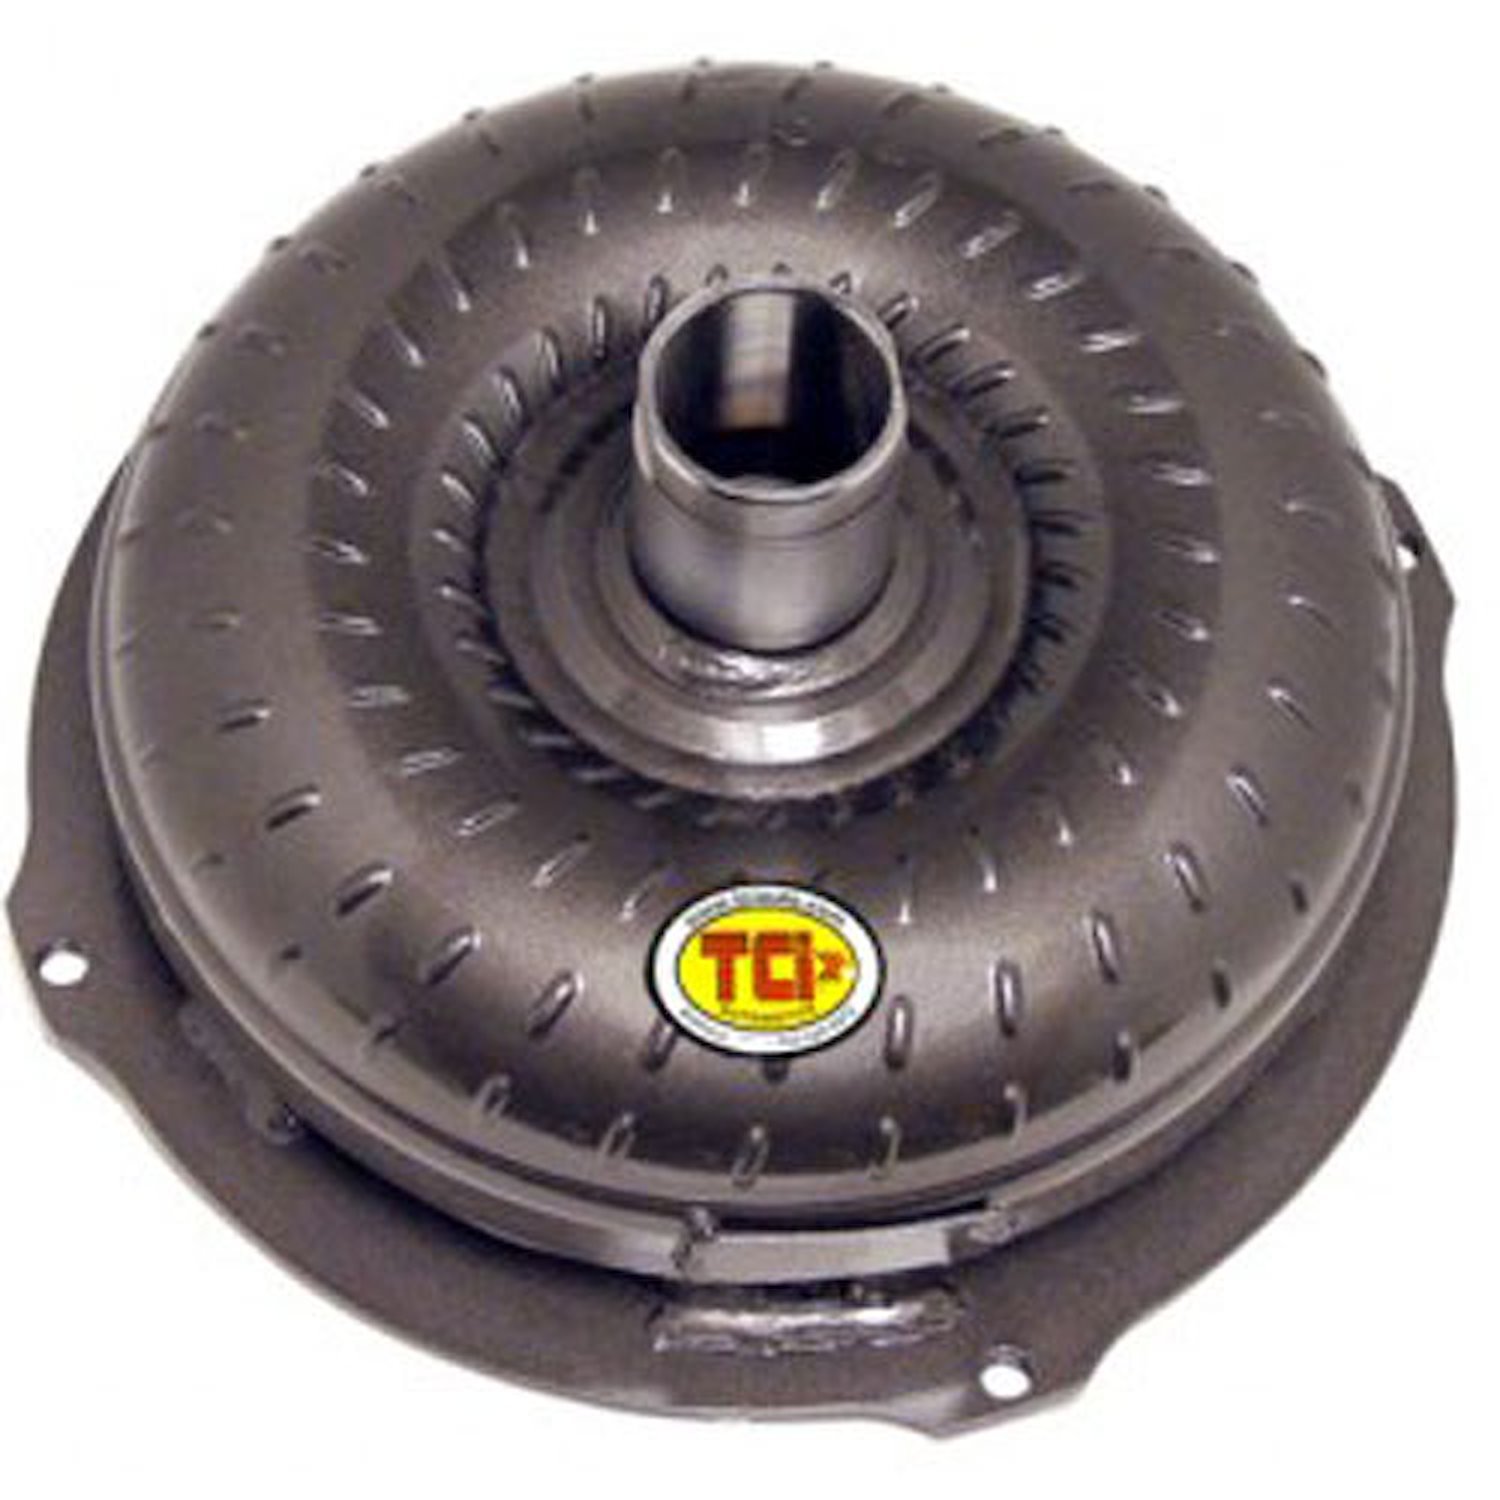 242100 10" Streetfighter Torque Converter for 1965-1981 GM TH350/TH375 Small Bolt Pattern (Except Lock-up)